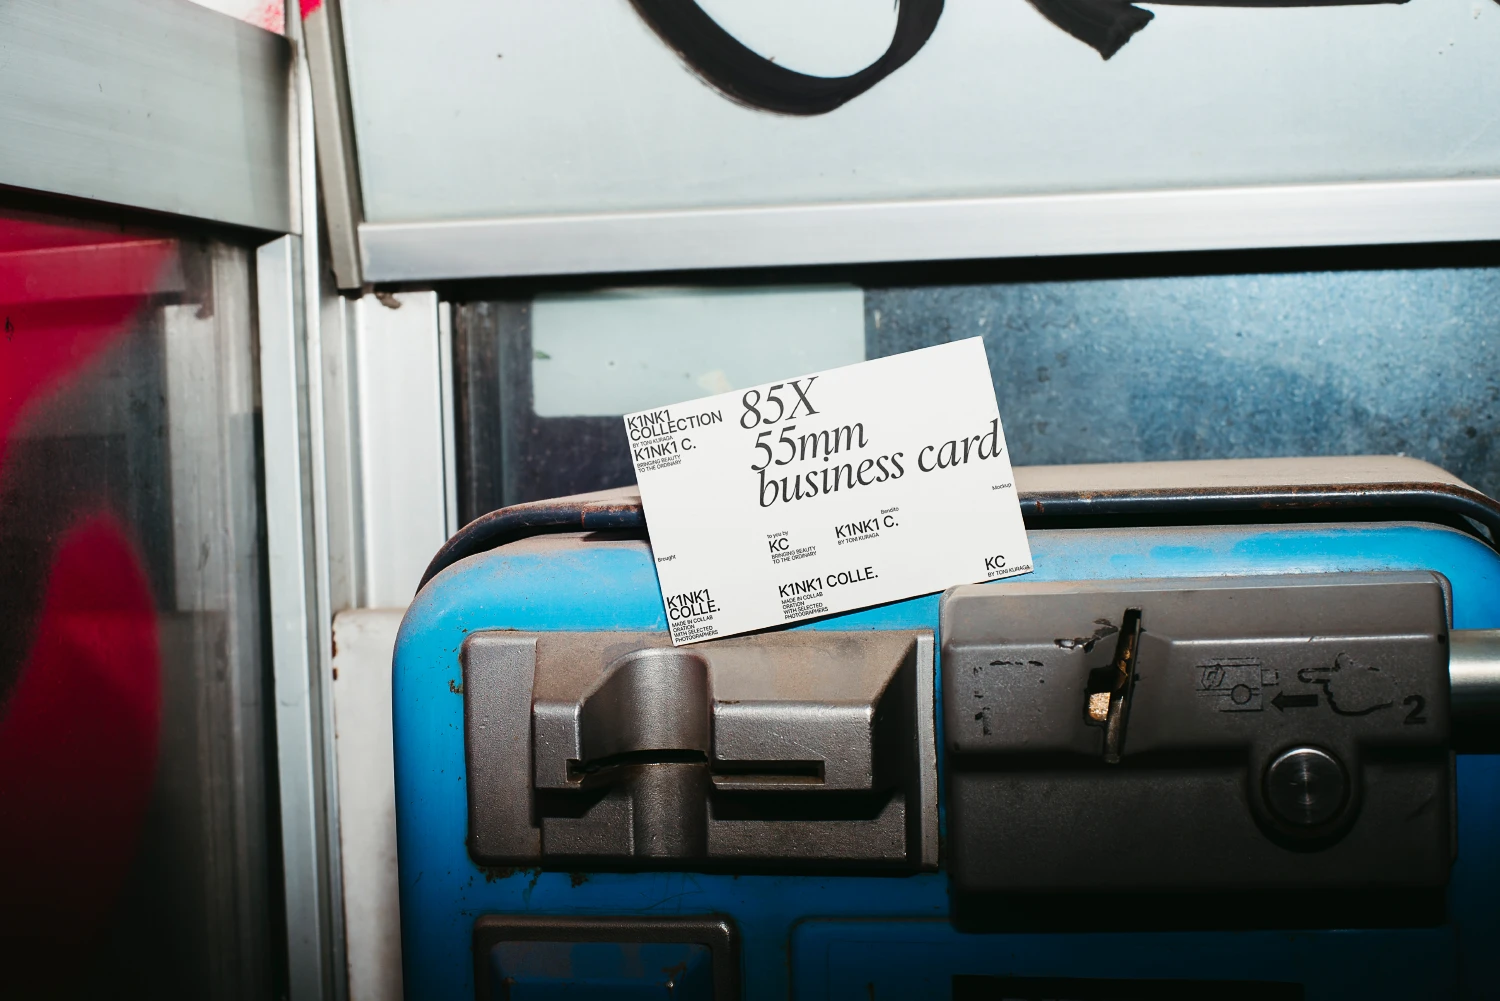 Business card mockup in the inside of a telephone booth.